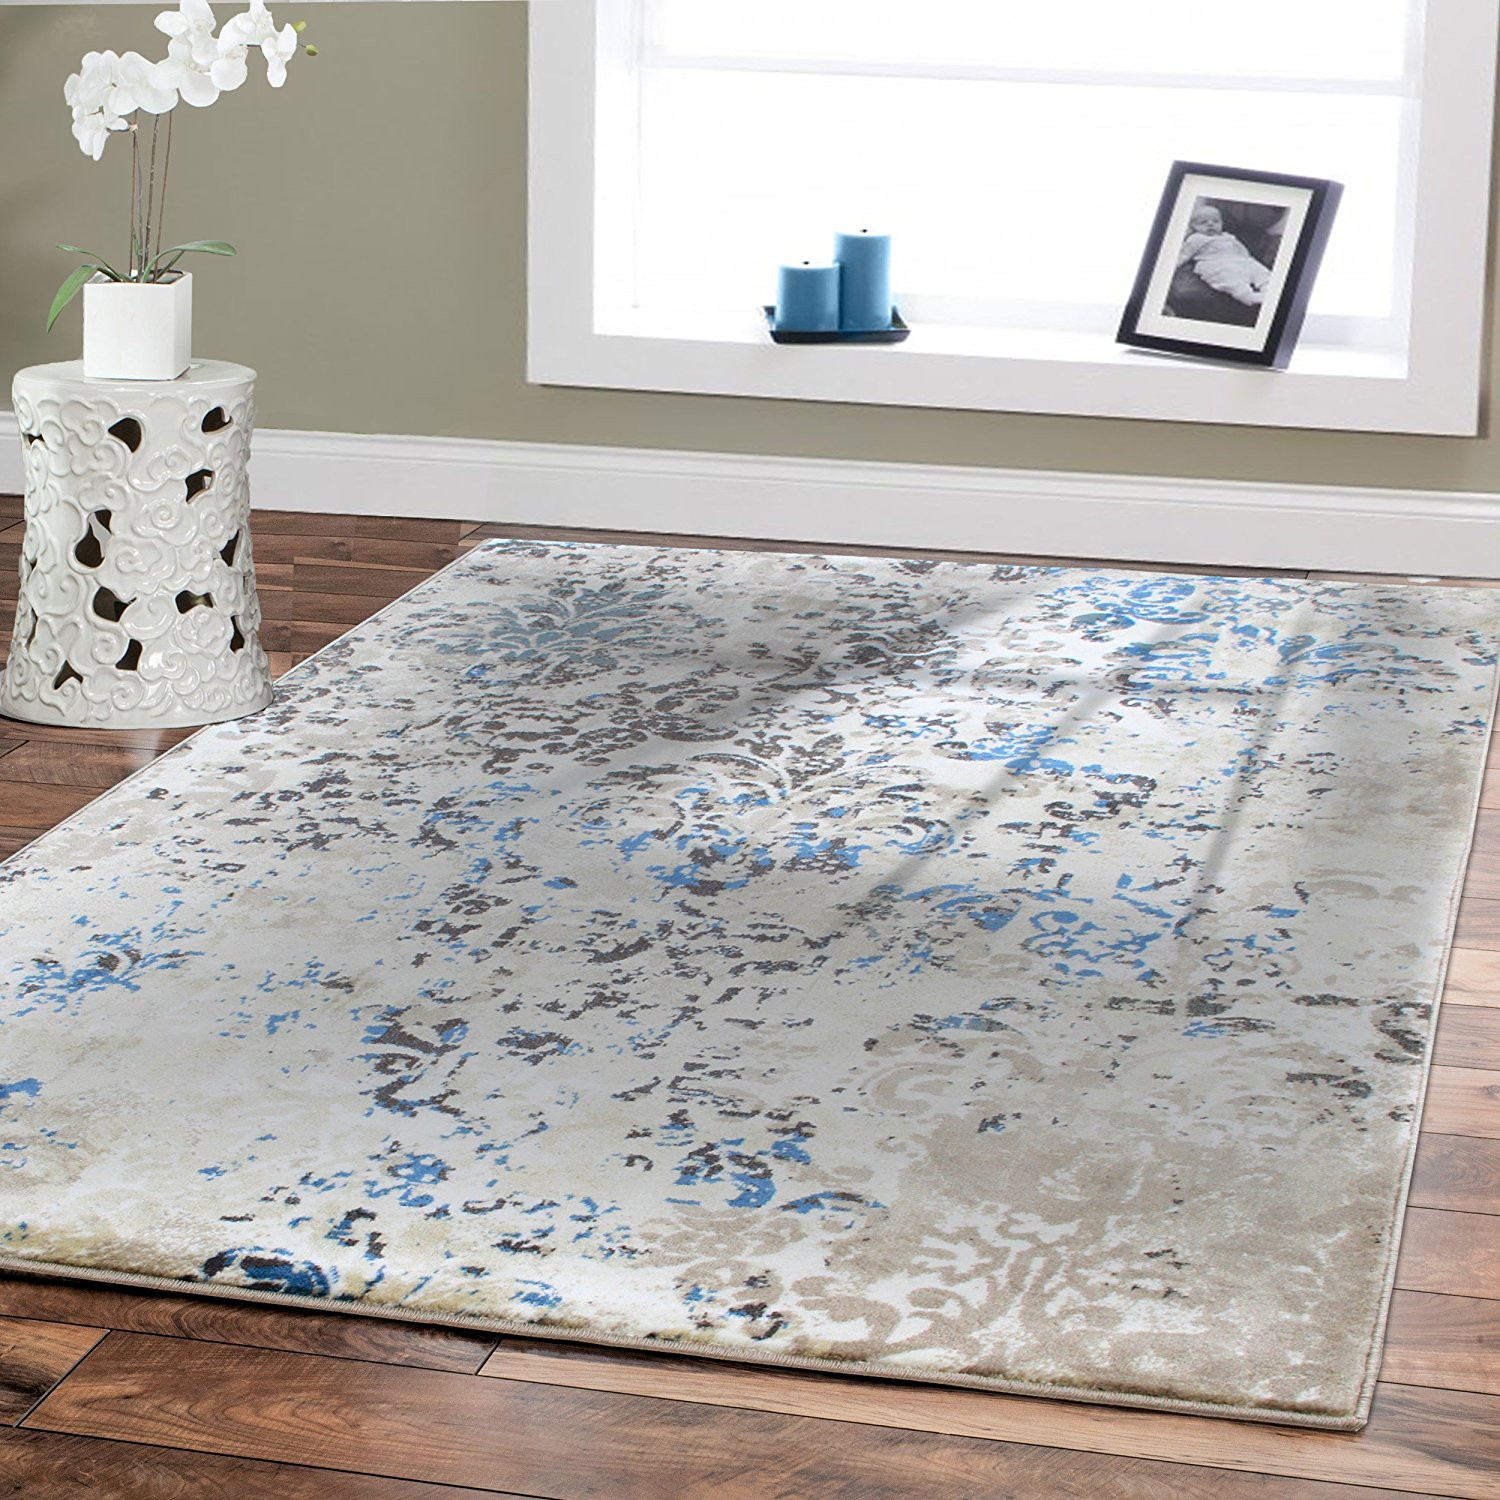 Nice Rugs For Living Room
 Luxury High Quality Rugs for Living Room 5x8 Cream Blue